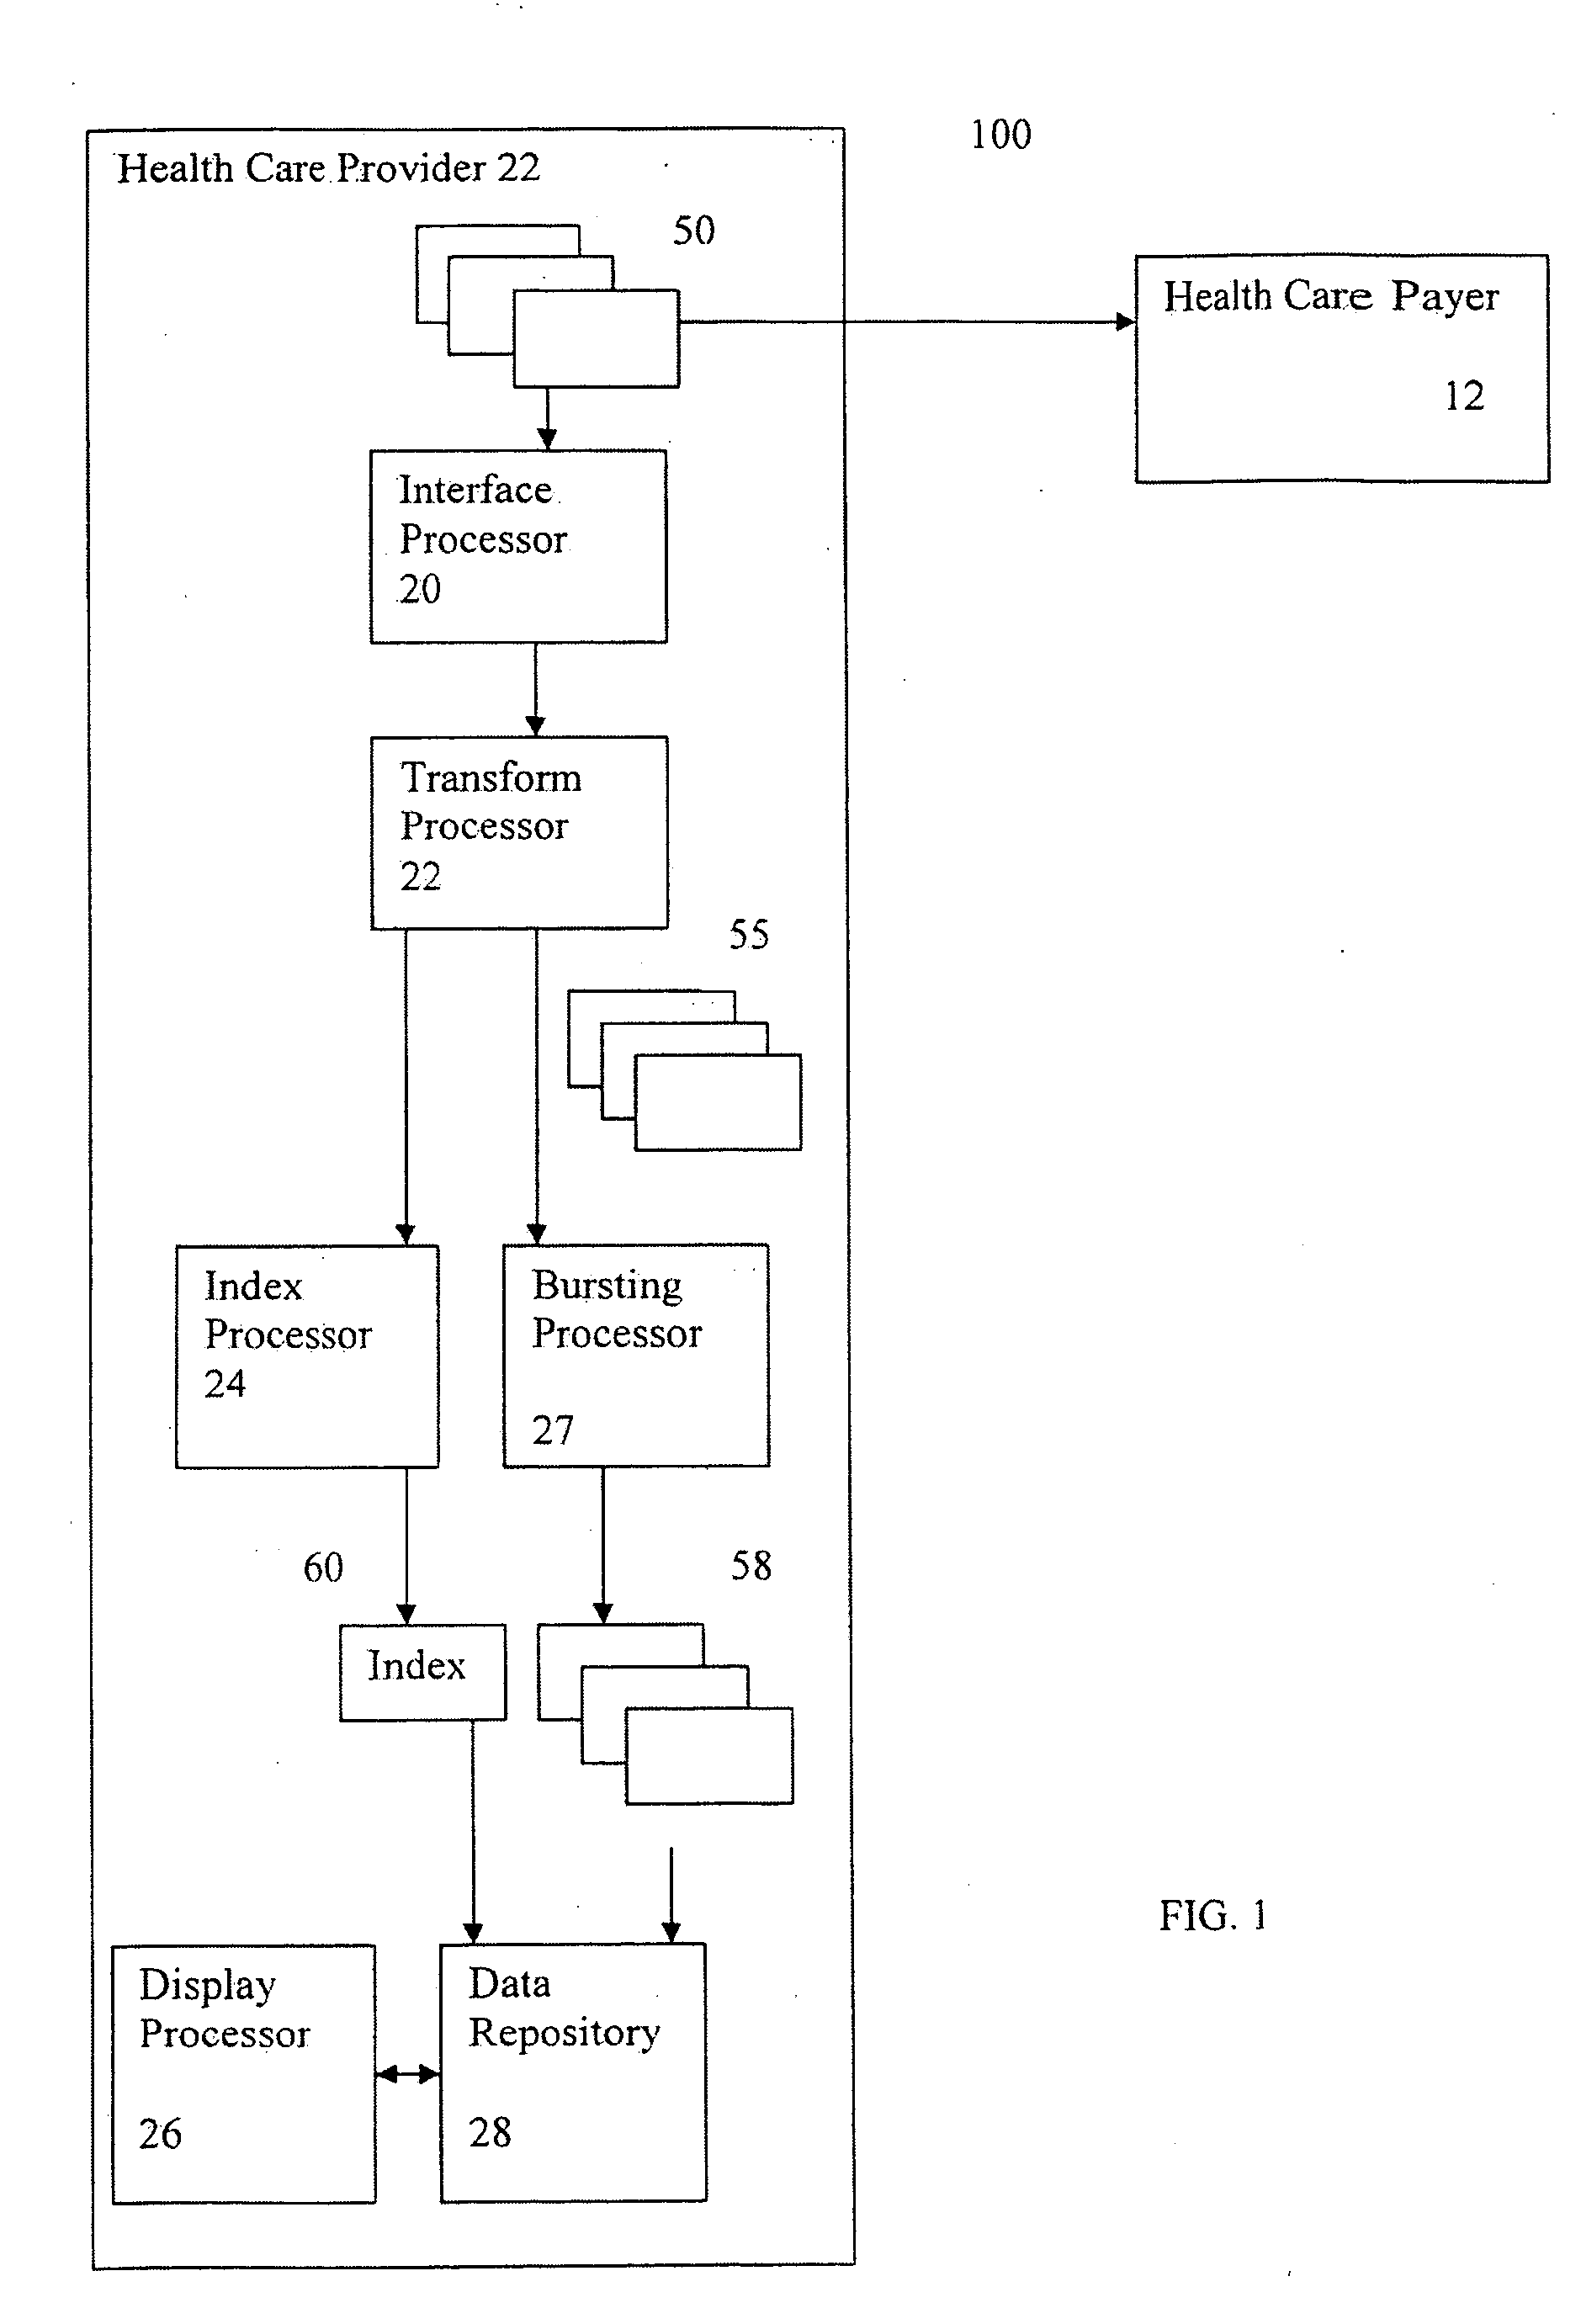 System and method for processing transaction records suitable for healthcare and other industries